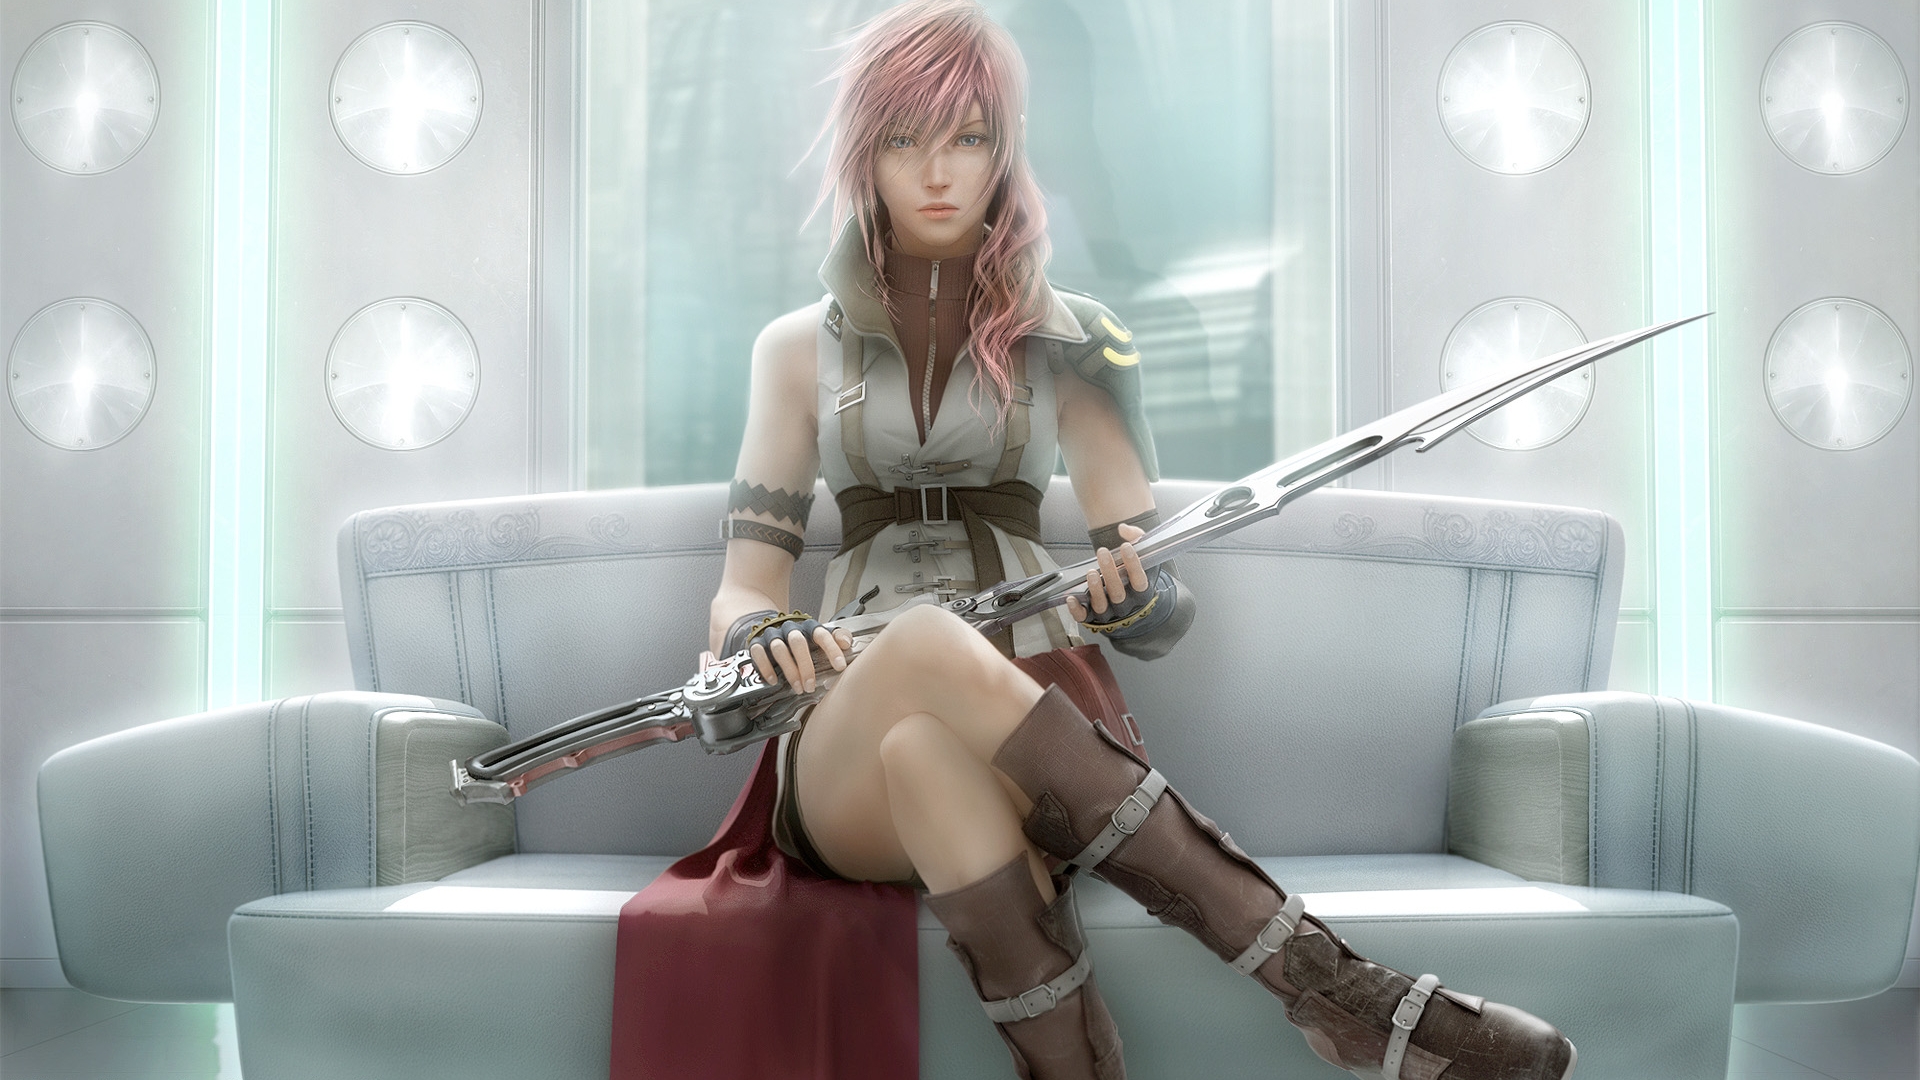 Ff13 Wallpapers